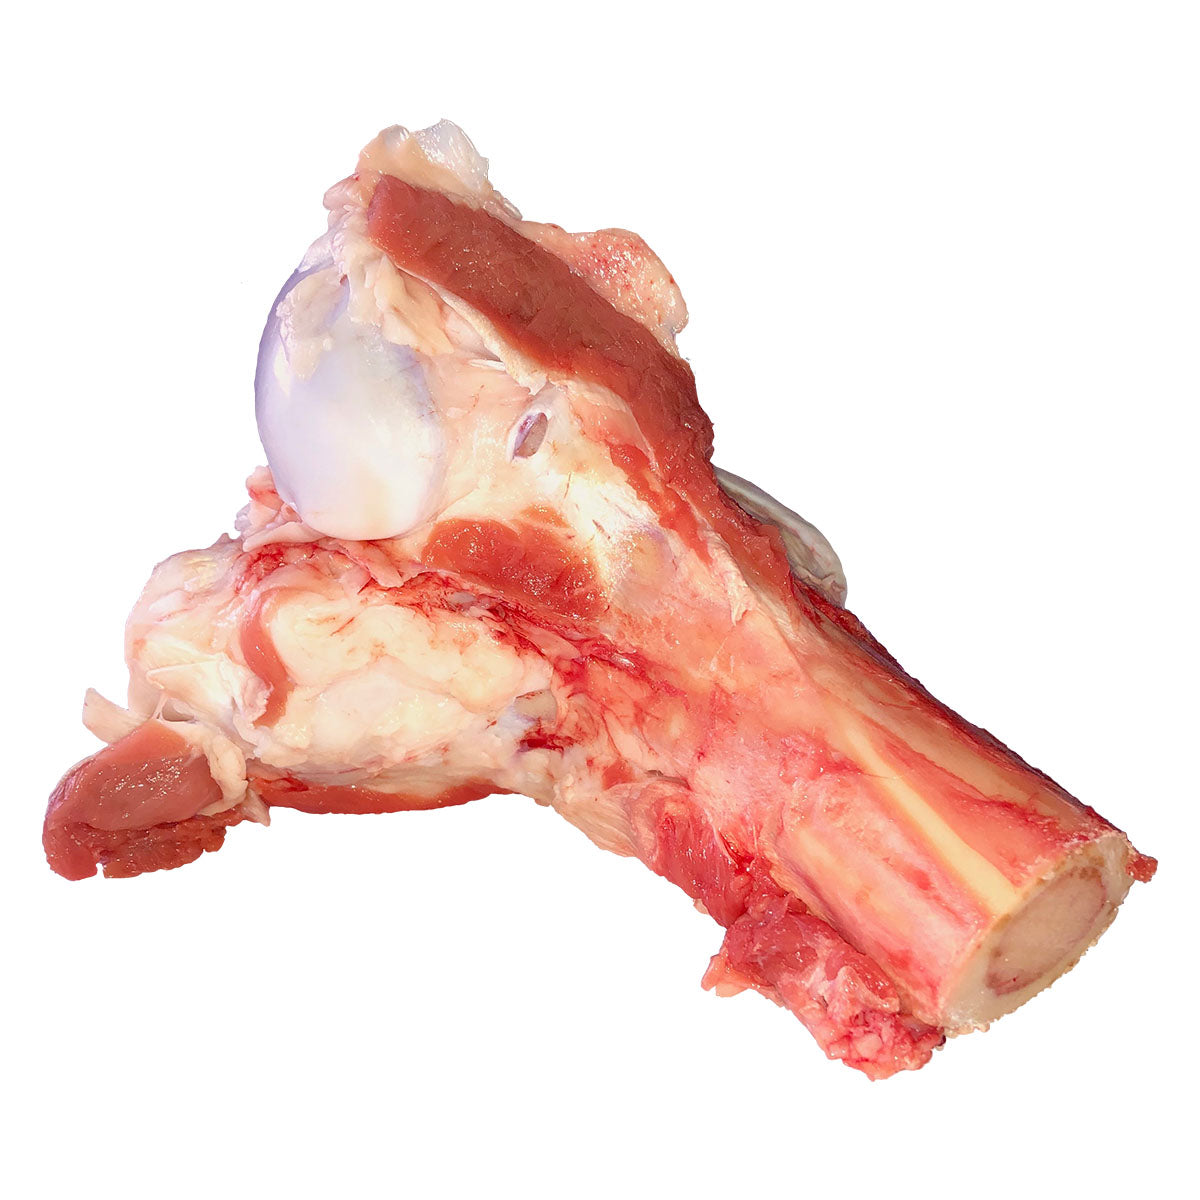 are raw marrow bones good for dogs